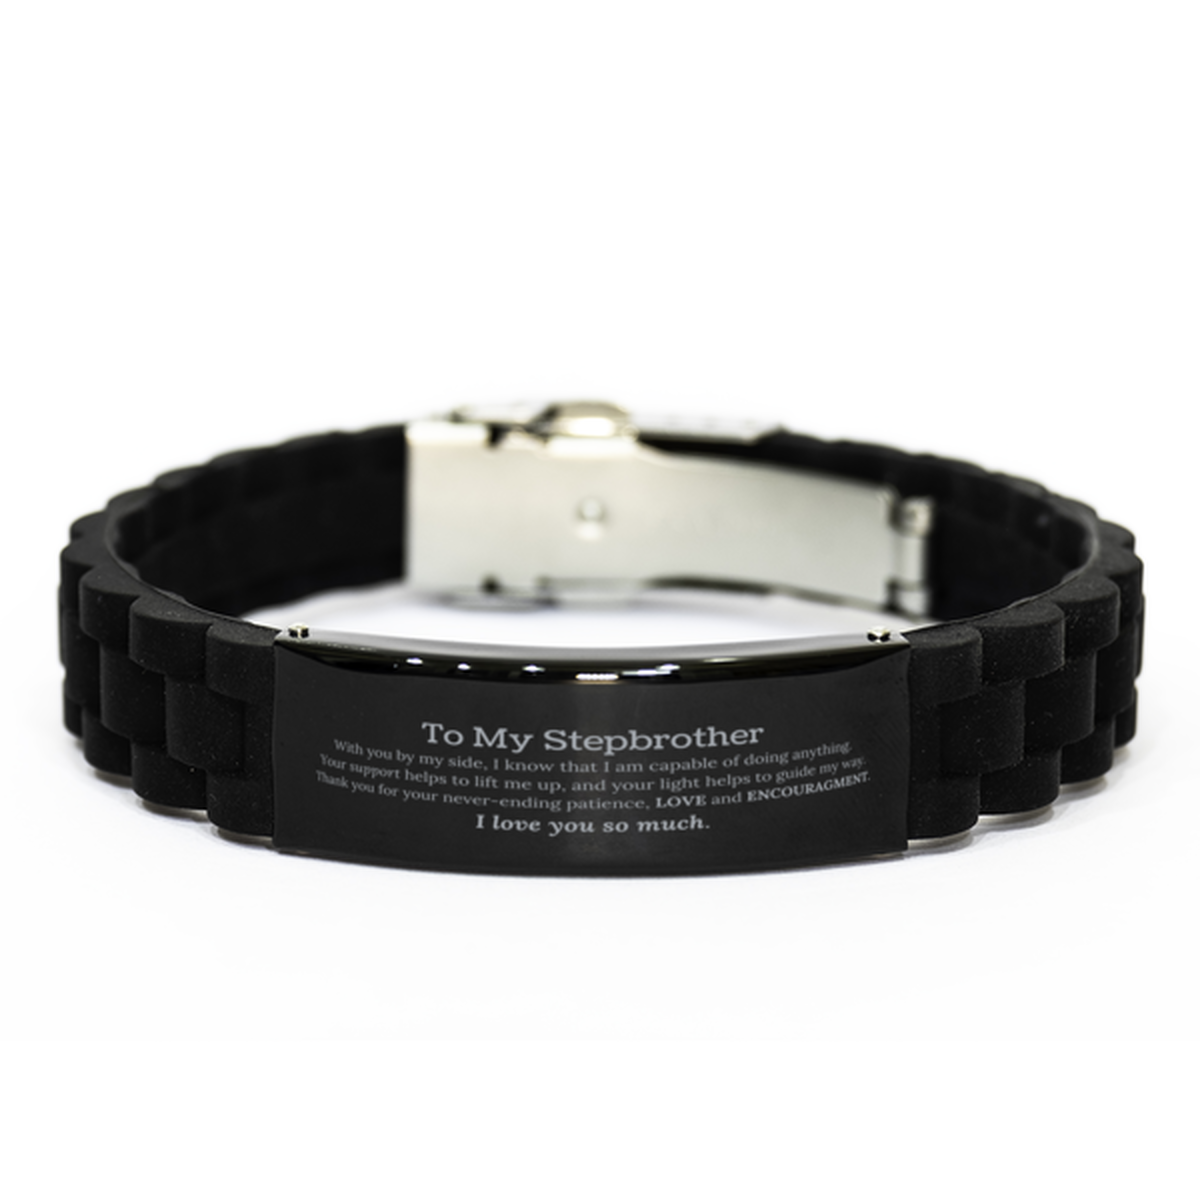 Appreciation Stepbrother Black Glidelock Clasp Bracelet Gifts, To My Stepbrother Birthday Christmas Wedding Keepsake Gifts for Stepbrother With you by my side, I know that I am capable of doing anything. I love you so much